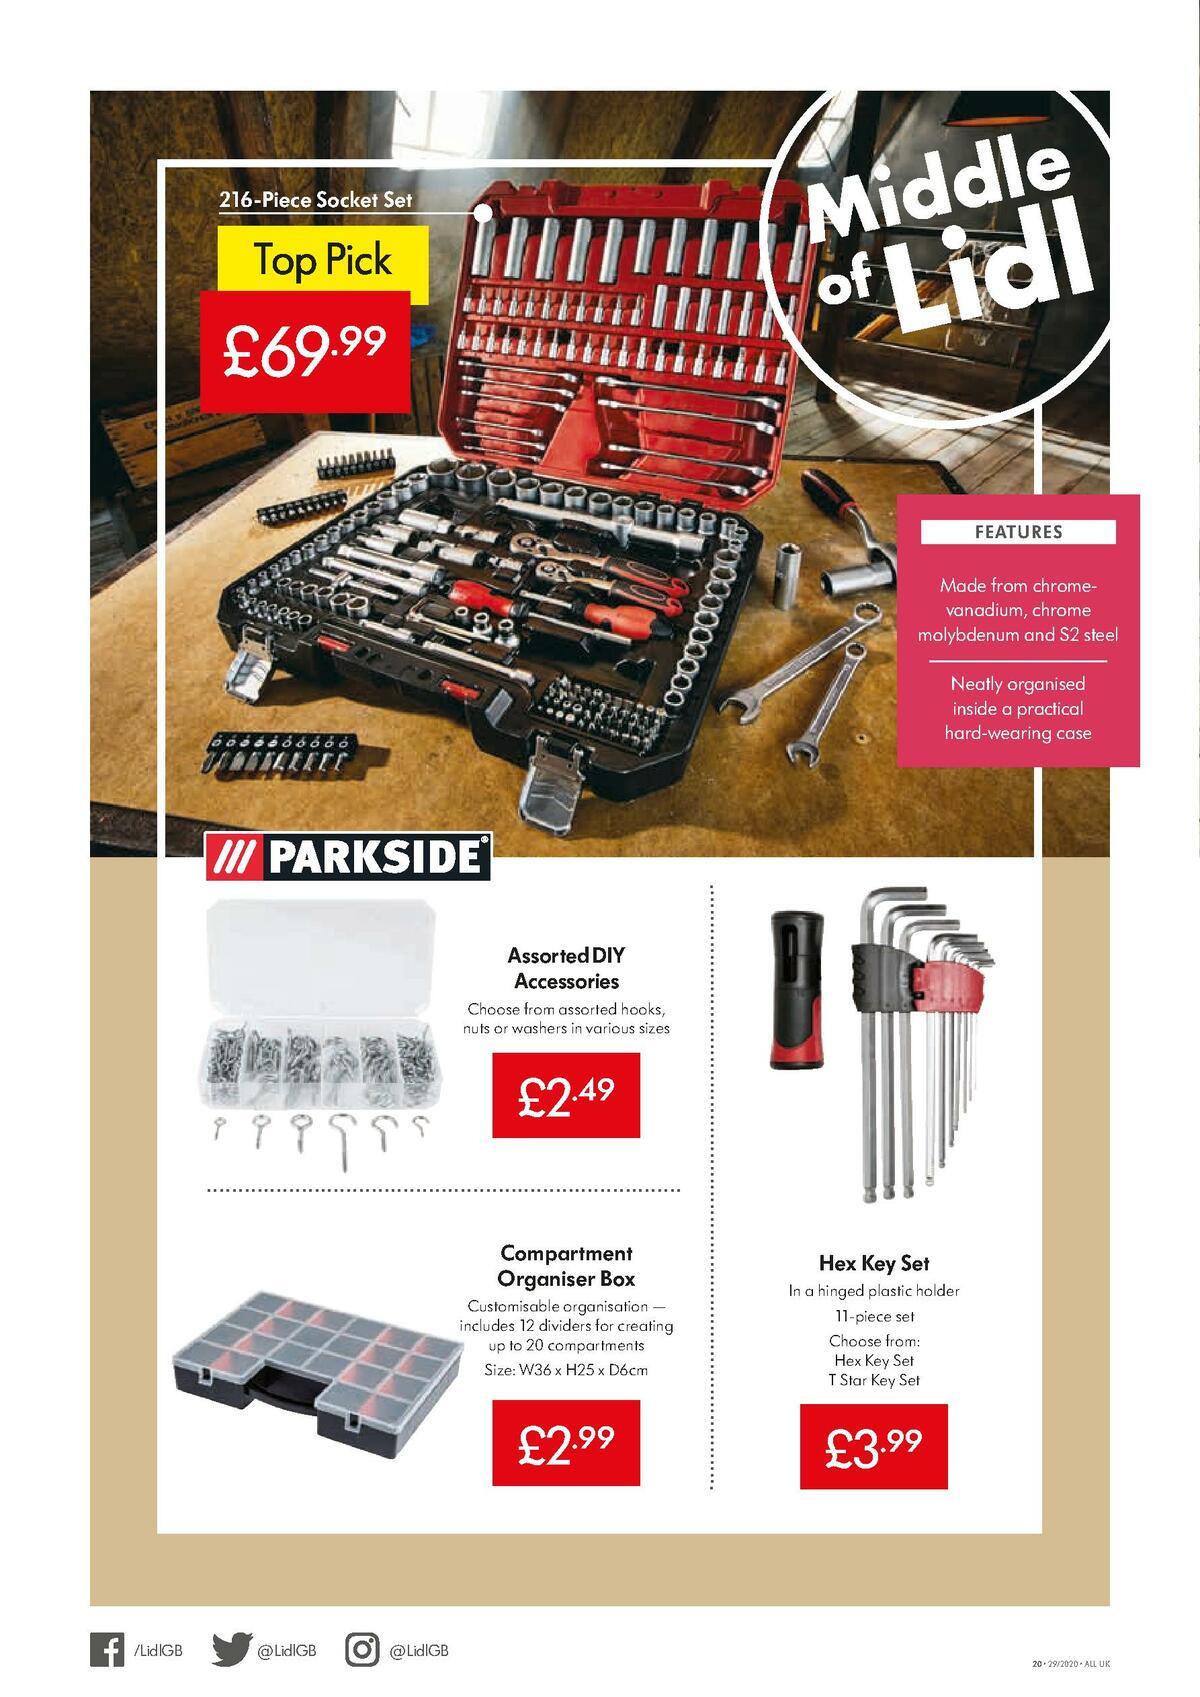 LIDL Offers from 16 July